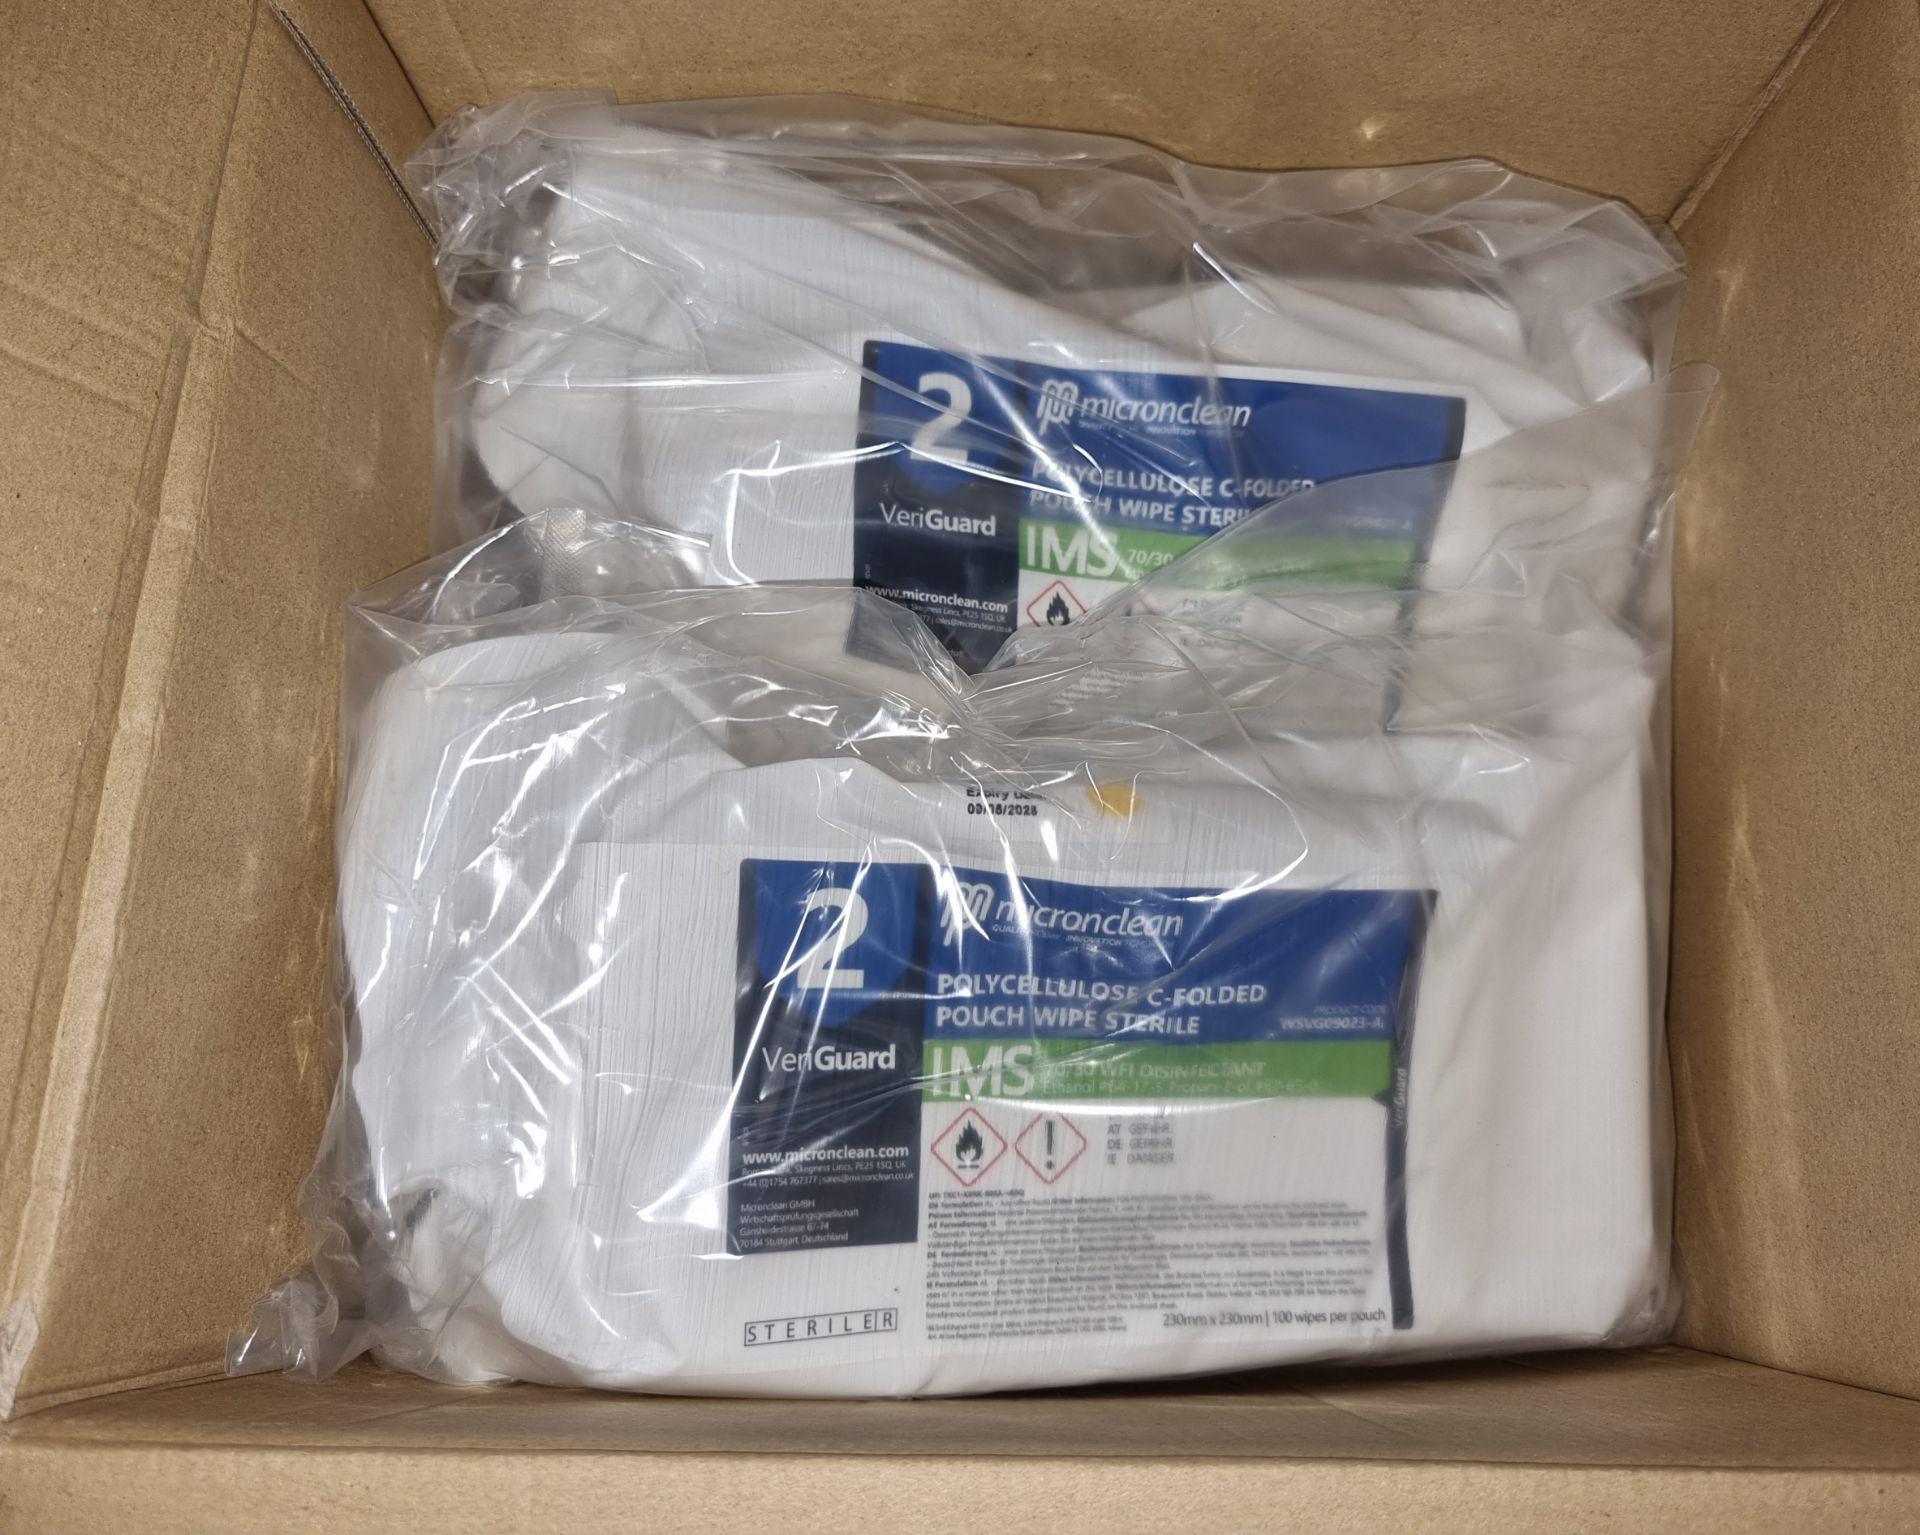 33x boxes of Micronclean Veriguard Polycellulose C-folded pouch wipe sterile - 230mm x 230mm - Bild 3 aus 4